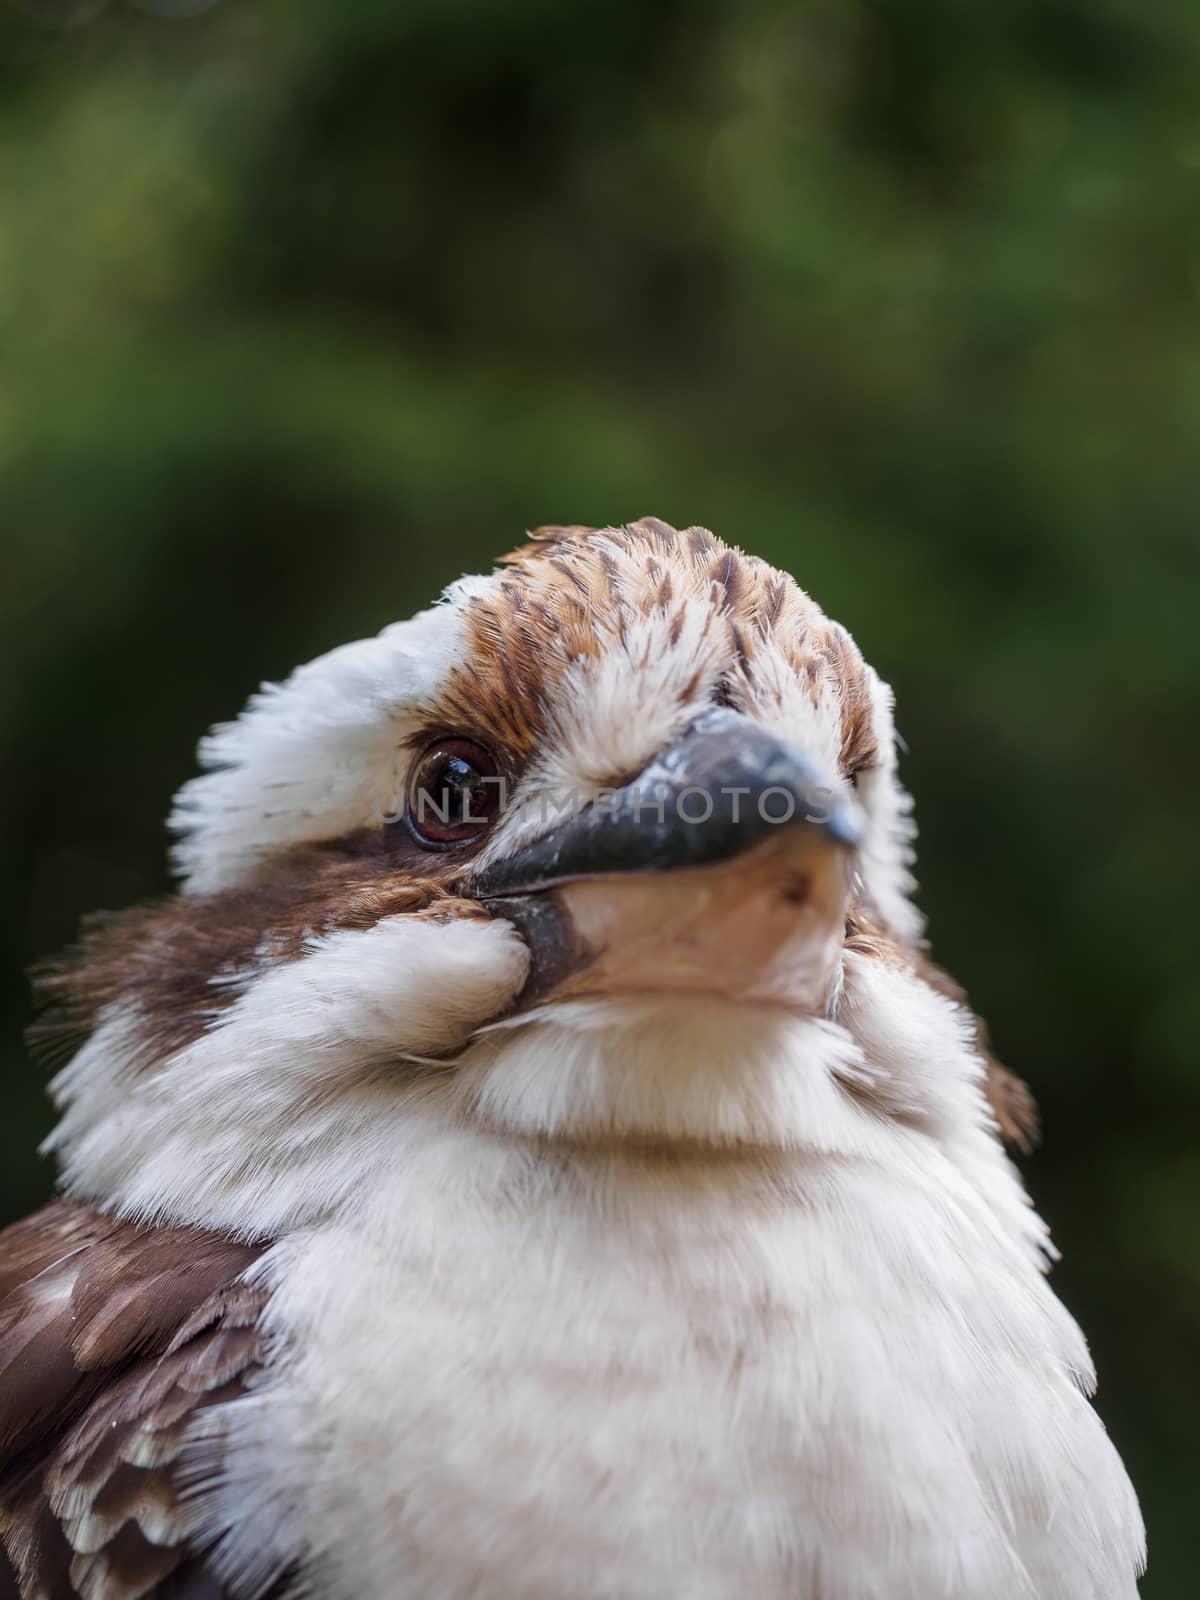 Closeup of a proud looking white and brown indonesian bird